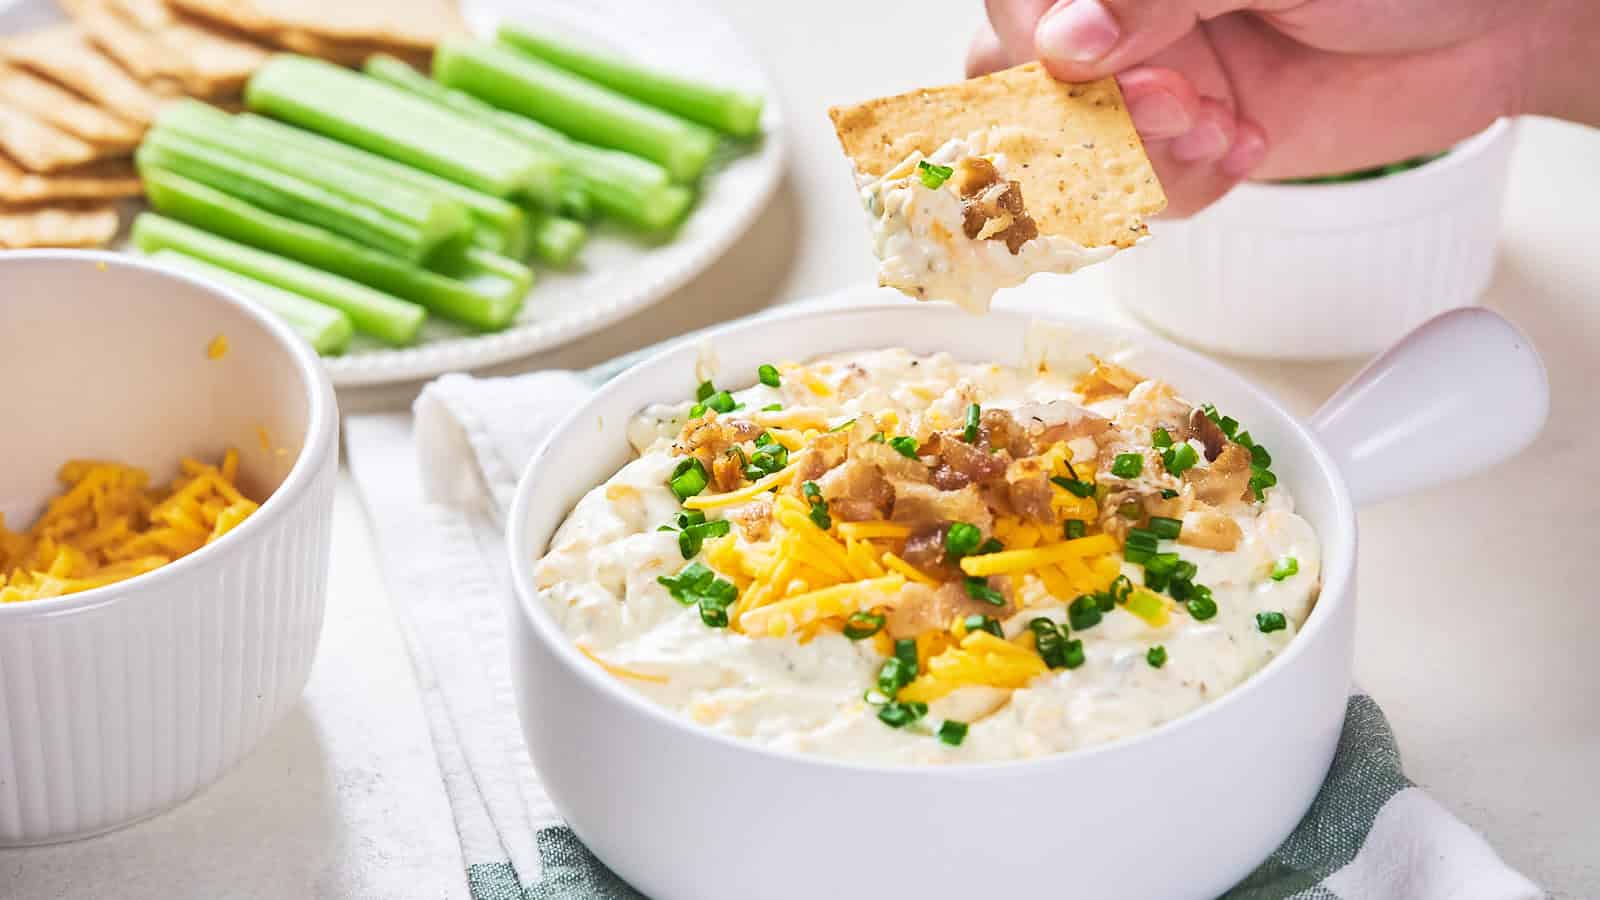 A person dipping a cracker into a bowl of creamy dip topped with chives and shredded cheese, with celery sticks and additional crackers on the side.